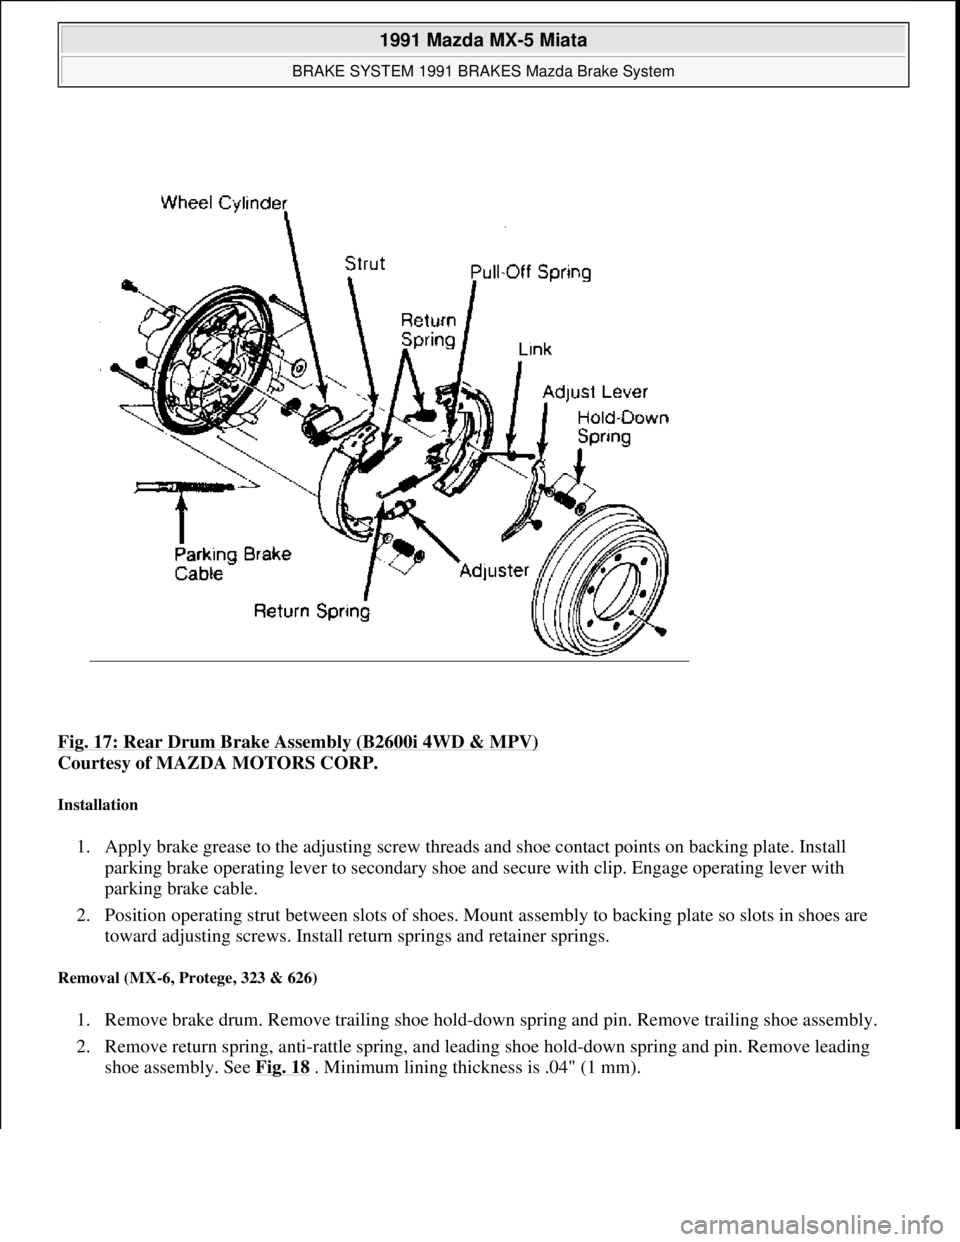 MAZDA MIATA 1991  Factory Service Manual Fig. 17: Rear Drum Brake Assembly (B2600i 4WD & MPV) 
Courtesy of MAZDA MOTORS CORP. 
Installation 
1. Apply brake grease to the adjusting screw threads and shoe contact points on backing plate. Insta